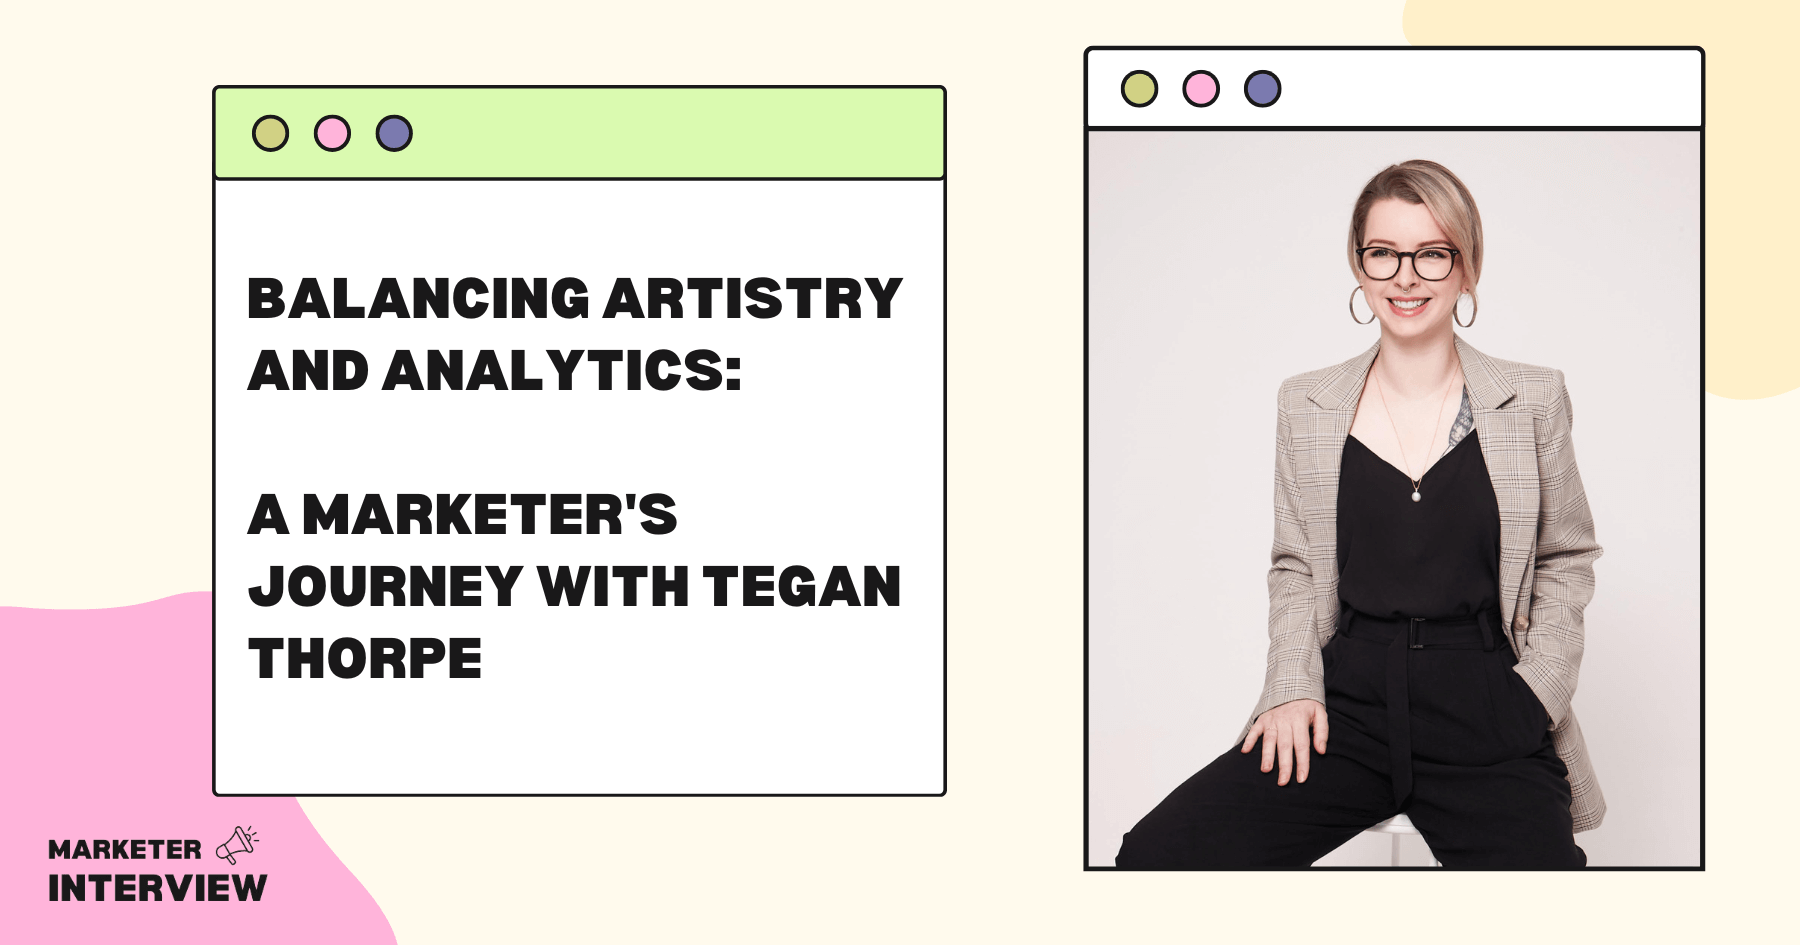 Balancing Artistry and Analytics: A Marketer's Journey with Tegan Thorpe